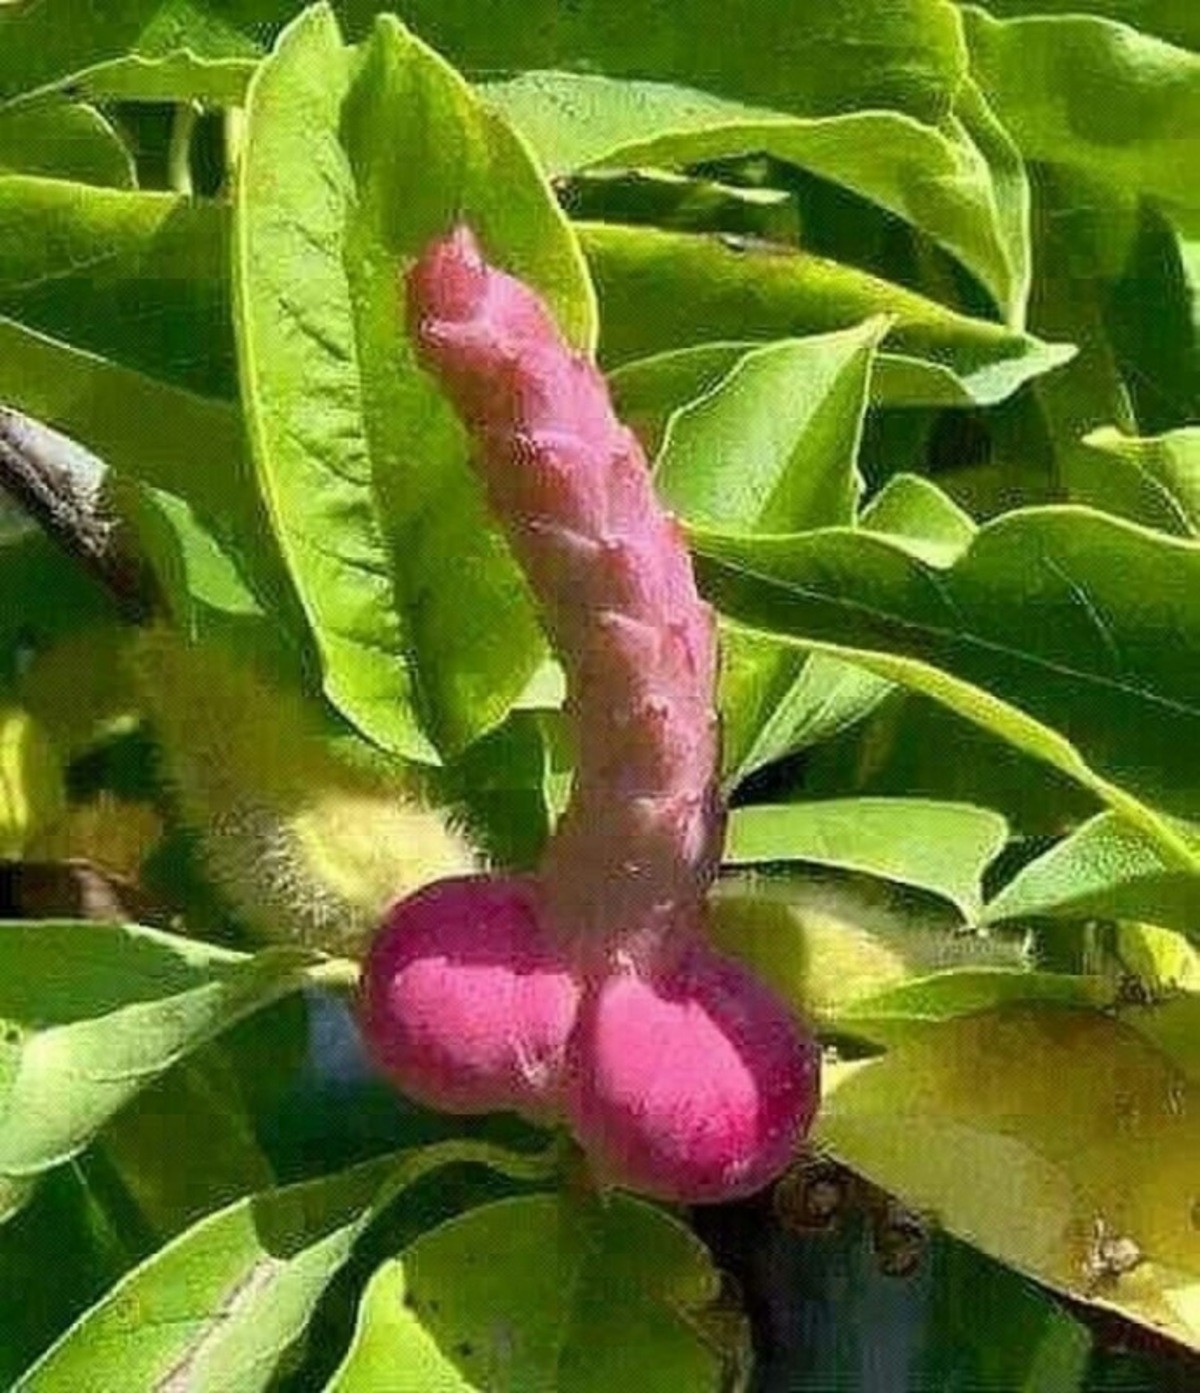 Vaguely Penis. 